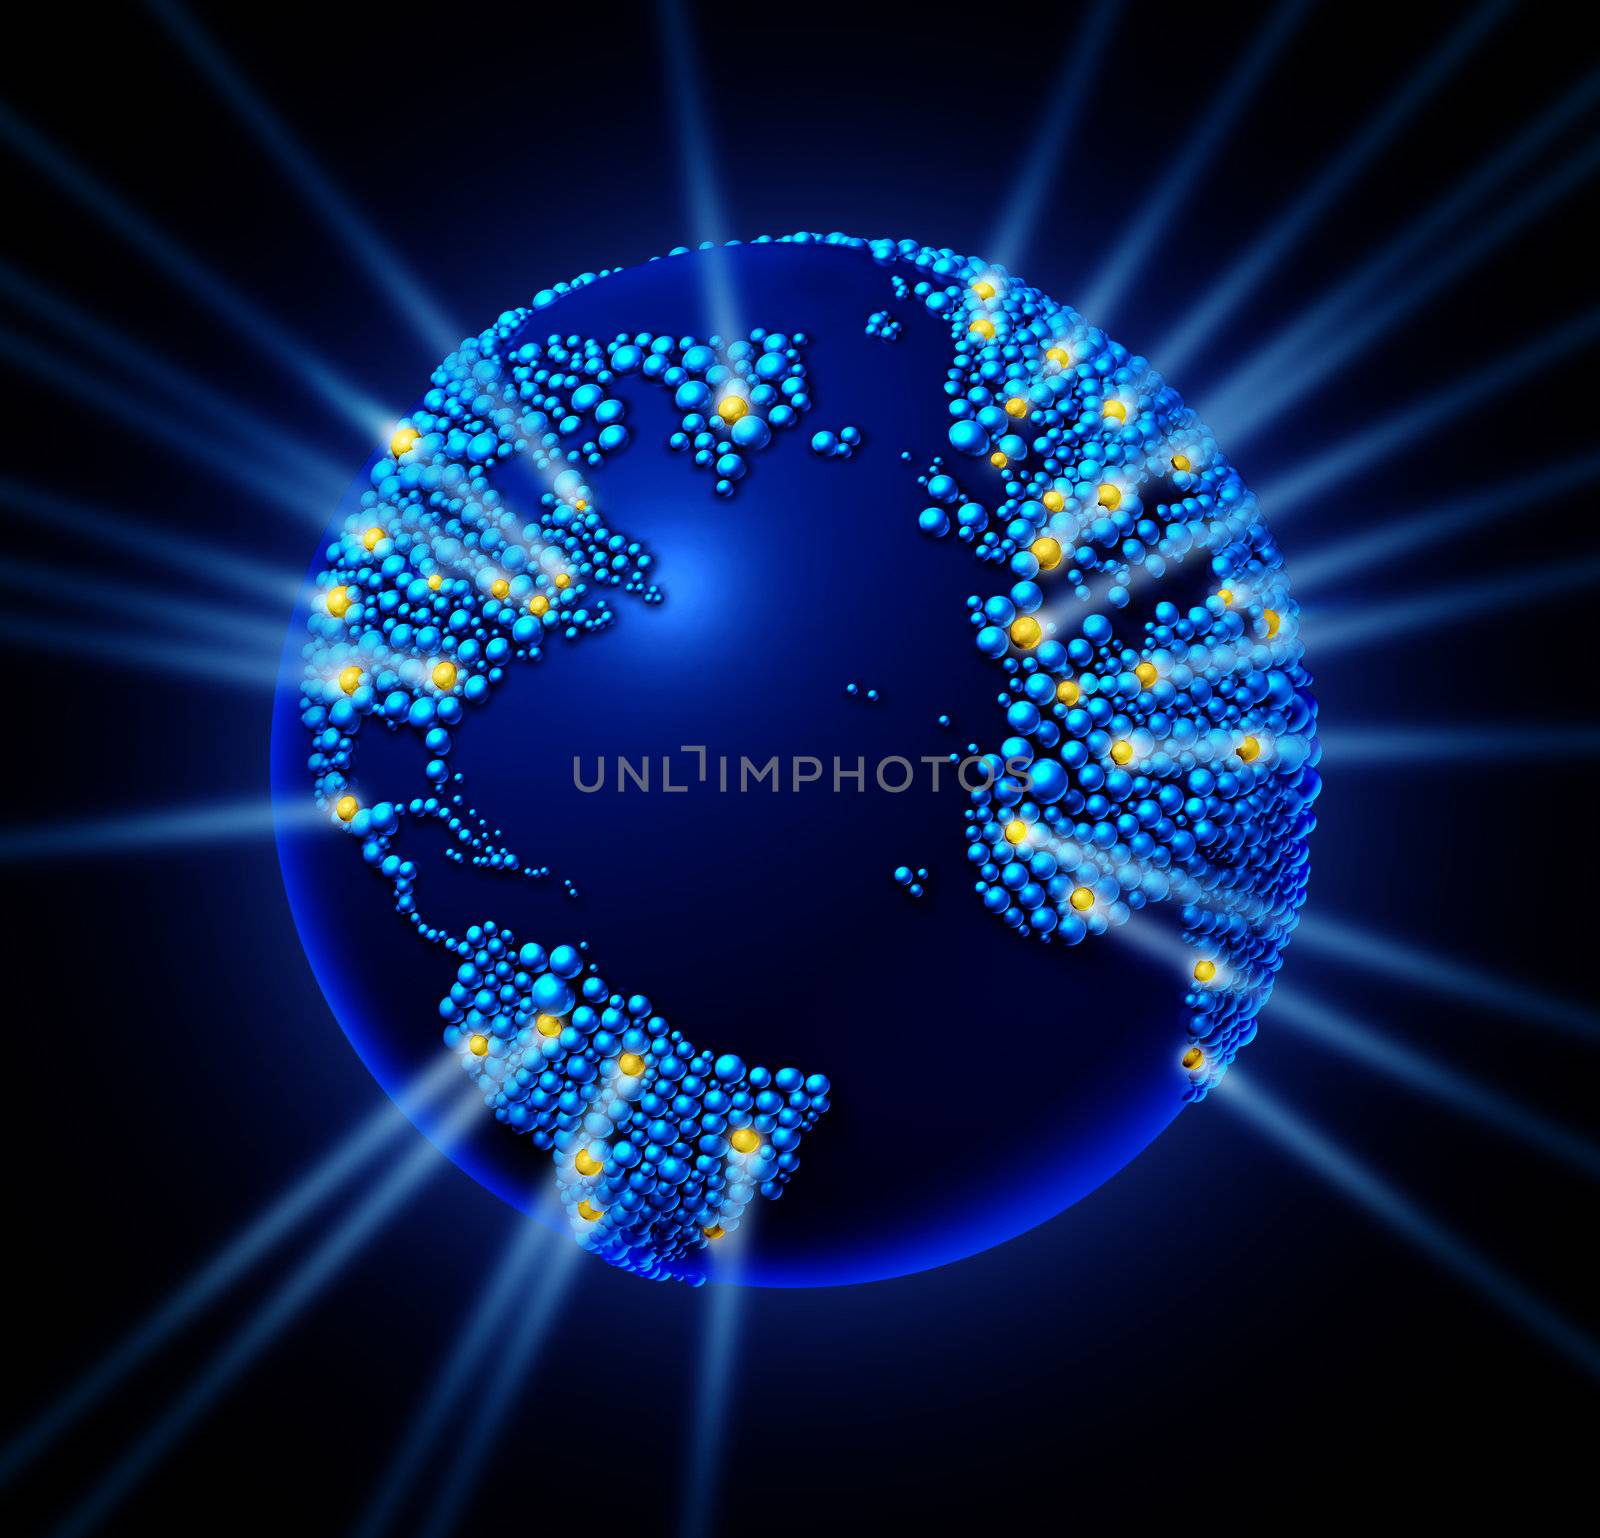 Global network world with the international map in the shape of small spheres with glowing laser lights as a technology icon and communication connections on a black background.